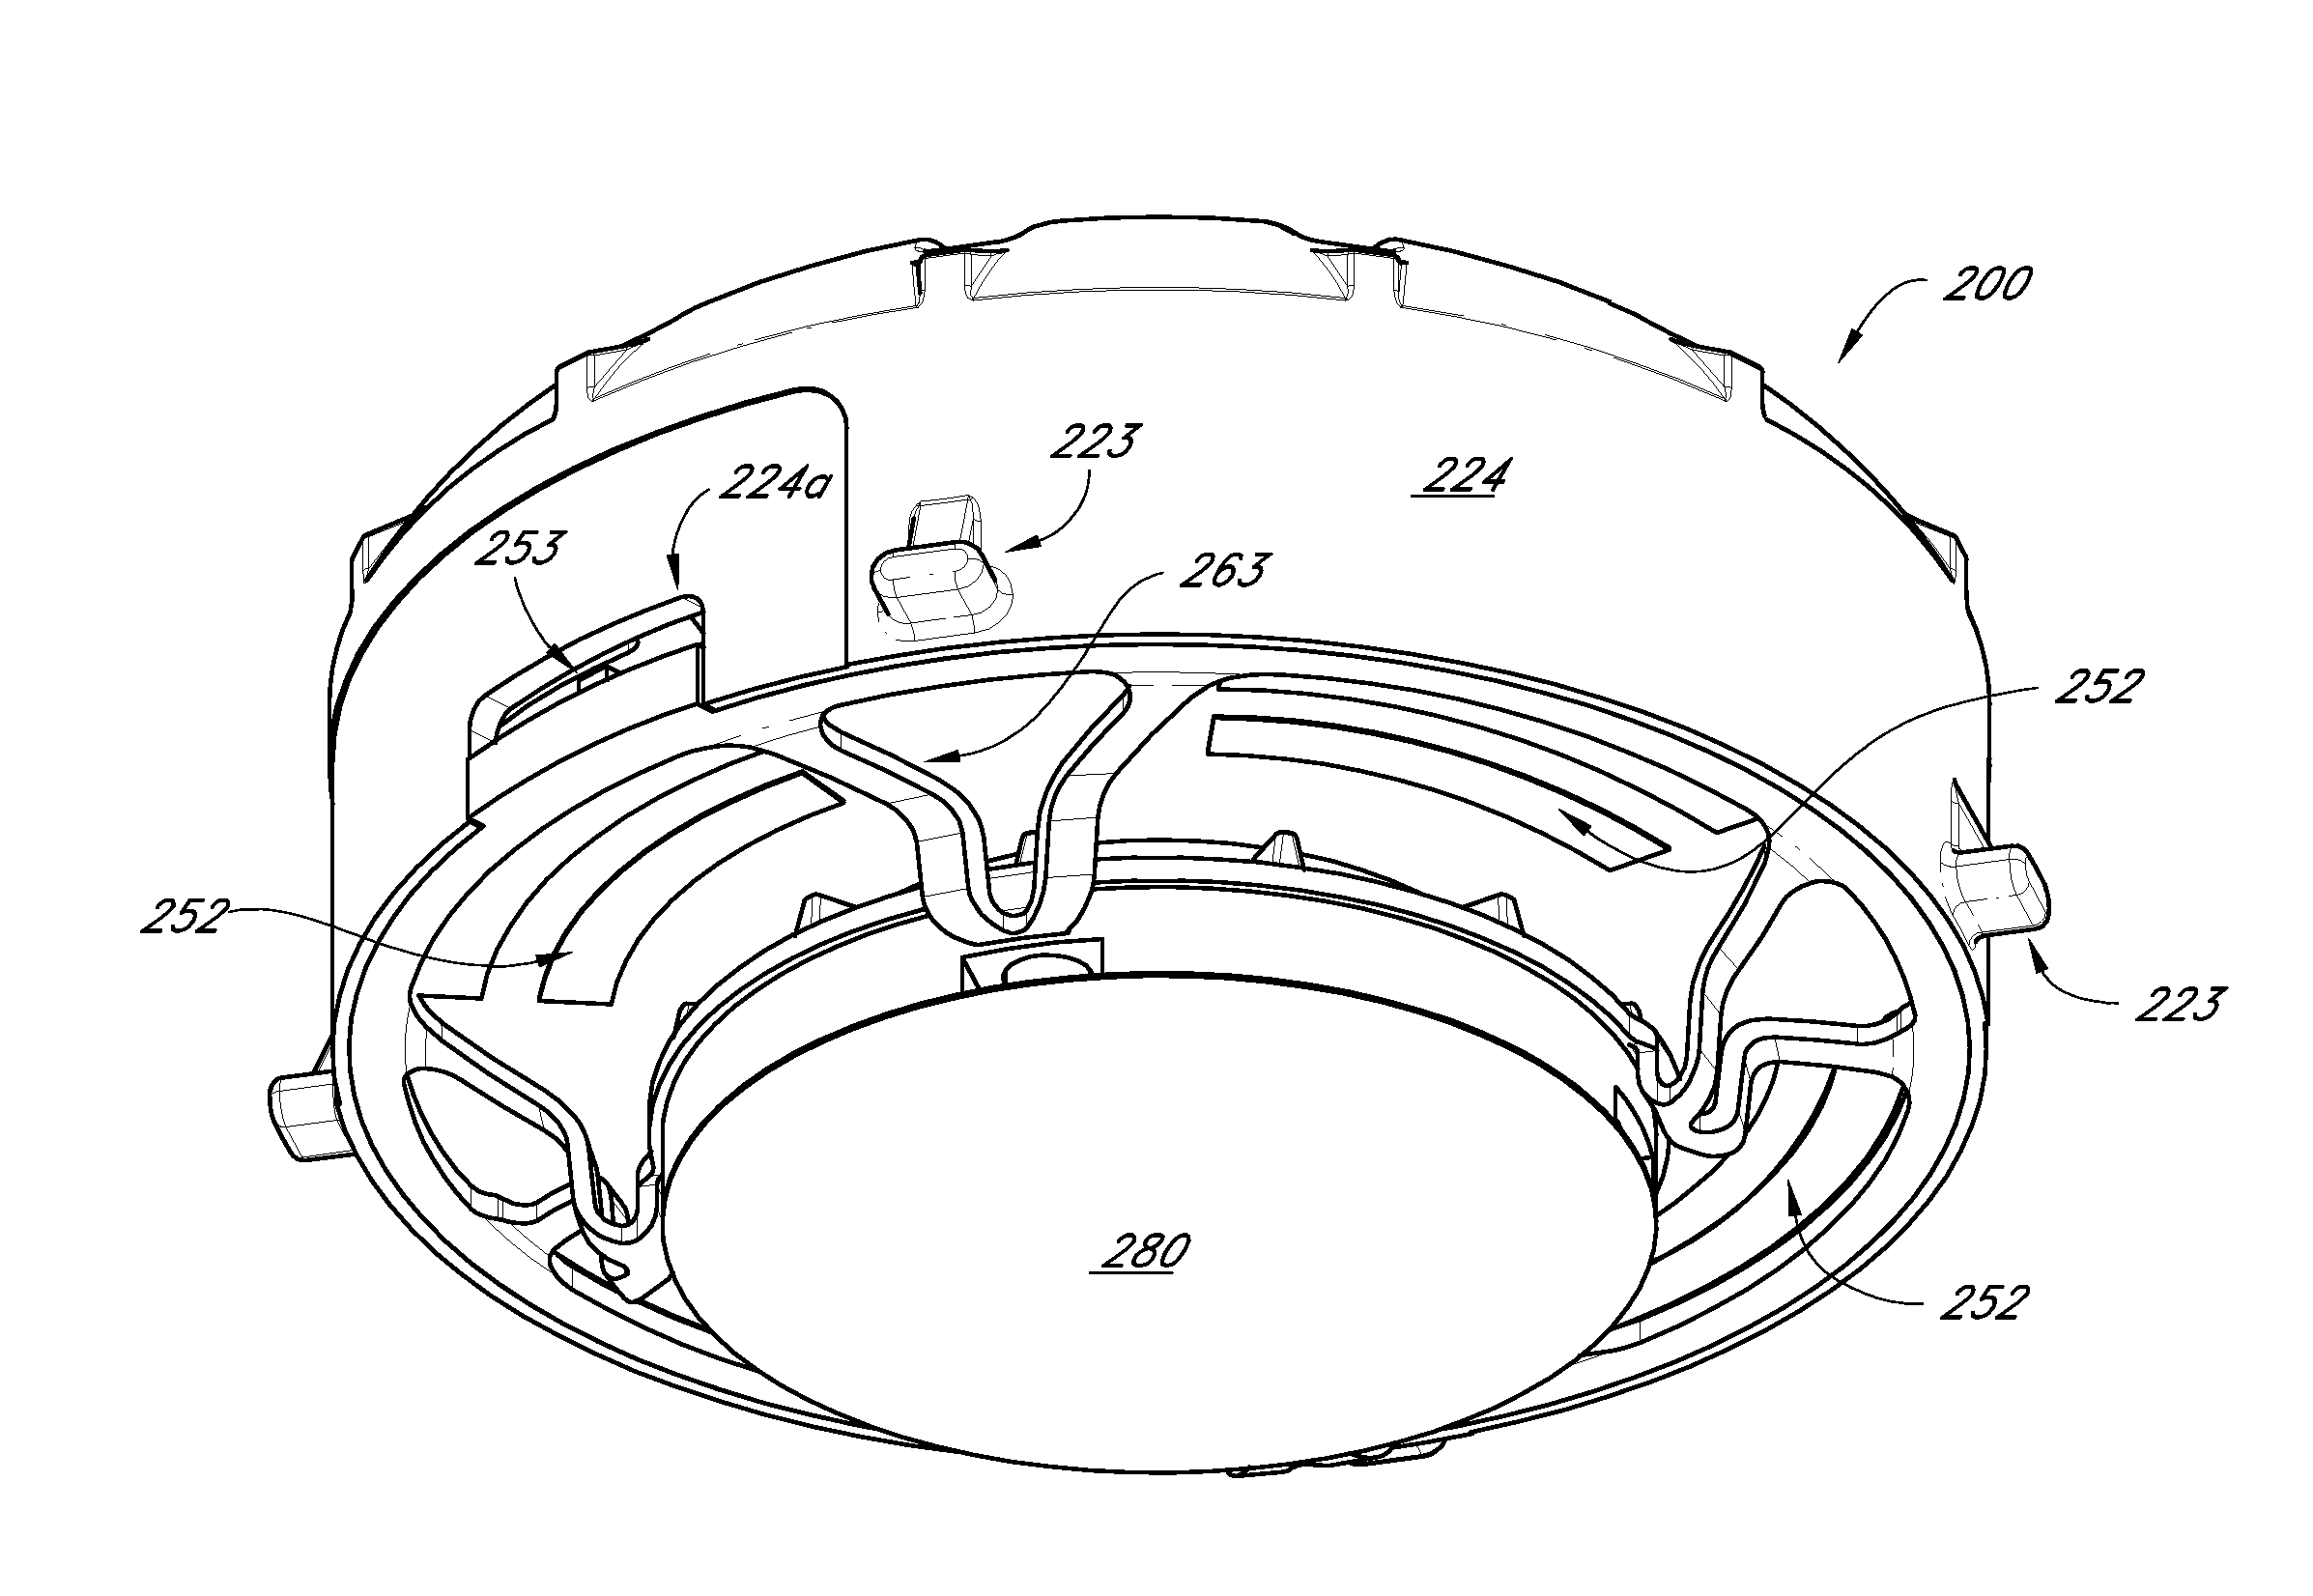 Removable LED light module for use in a light fixture assembly